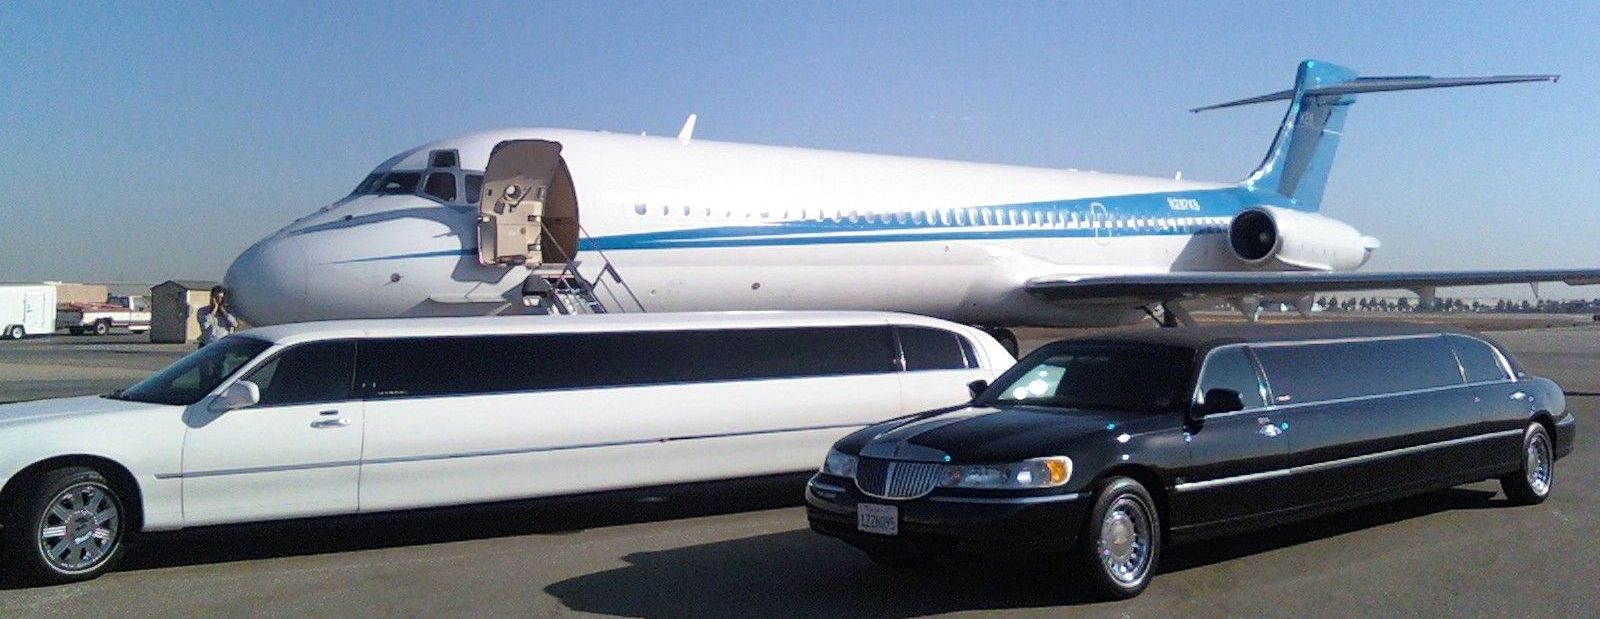 Our American luxury limos are bliss, not just a means of transportation